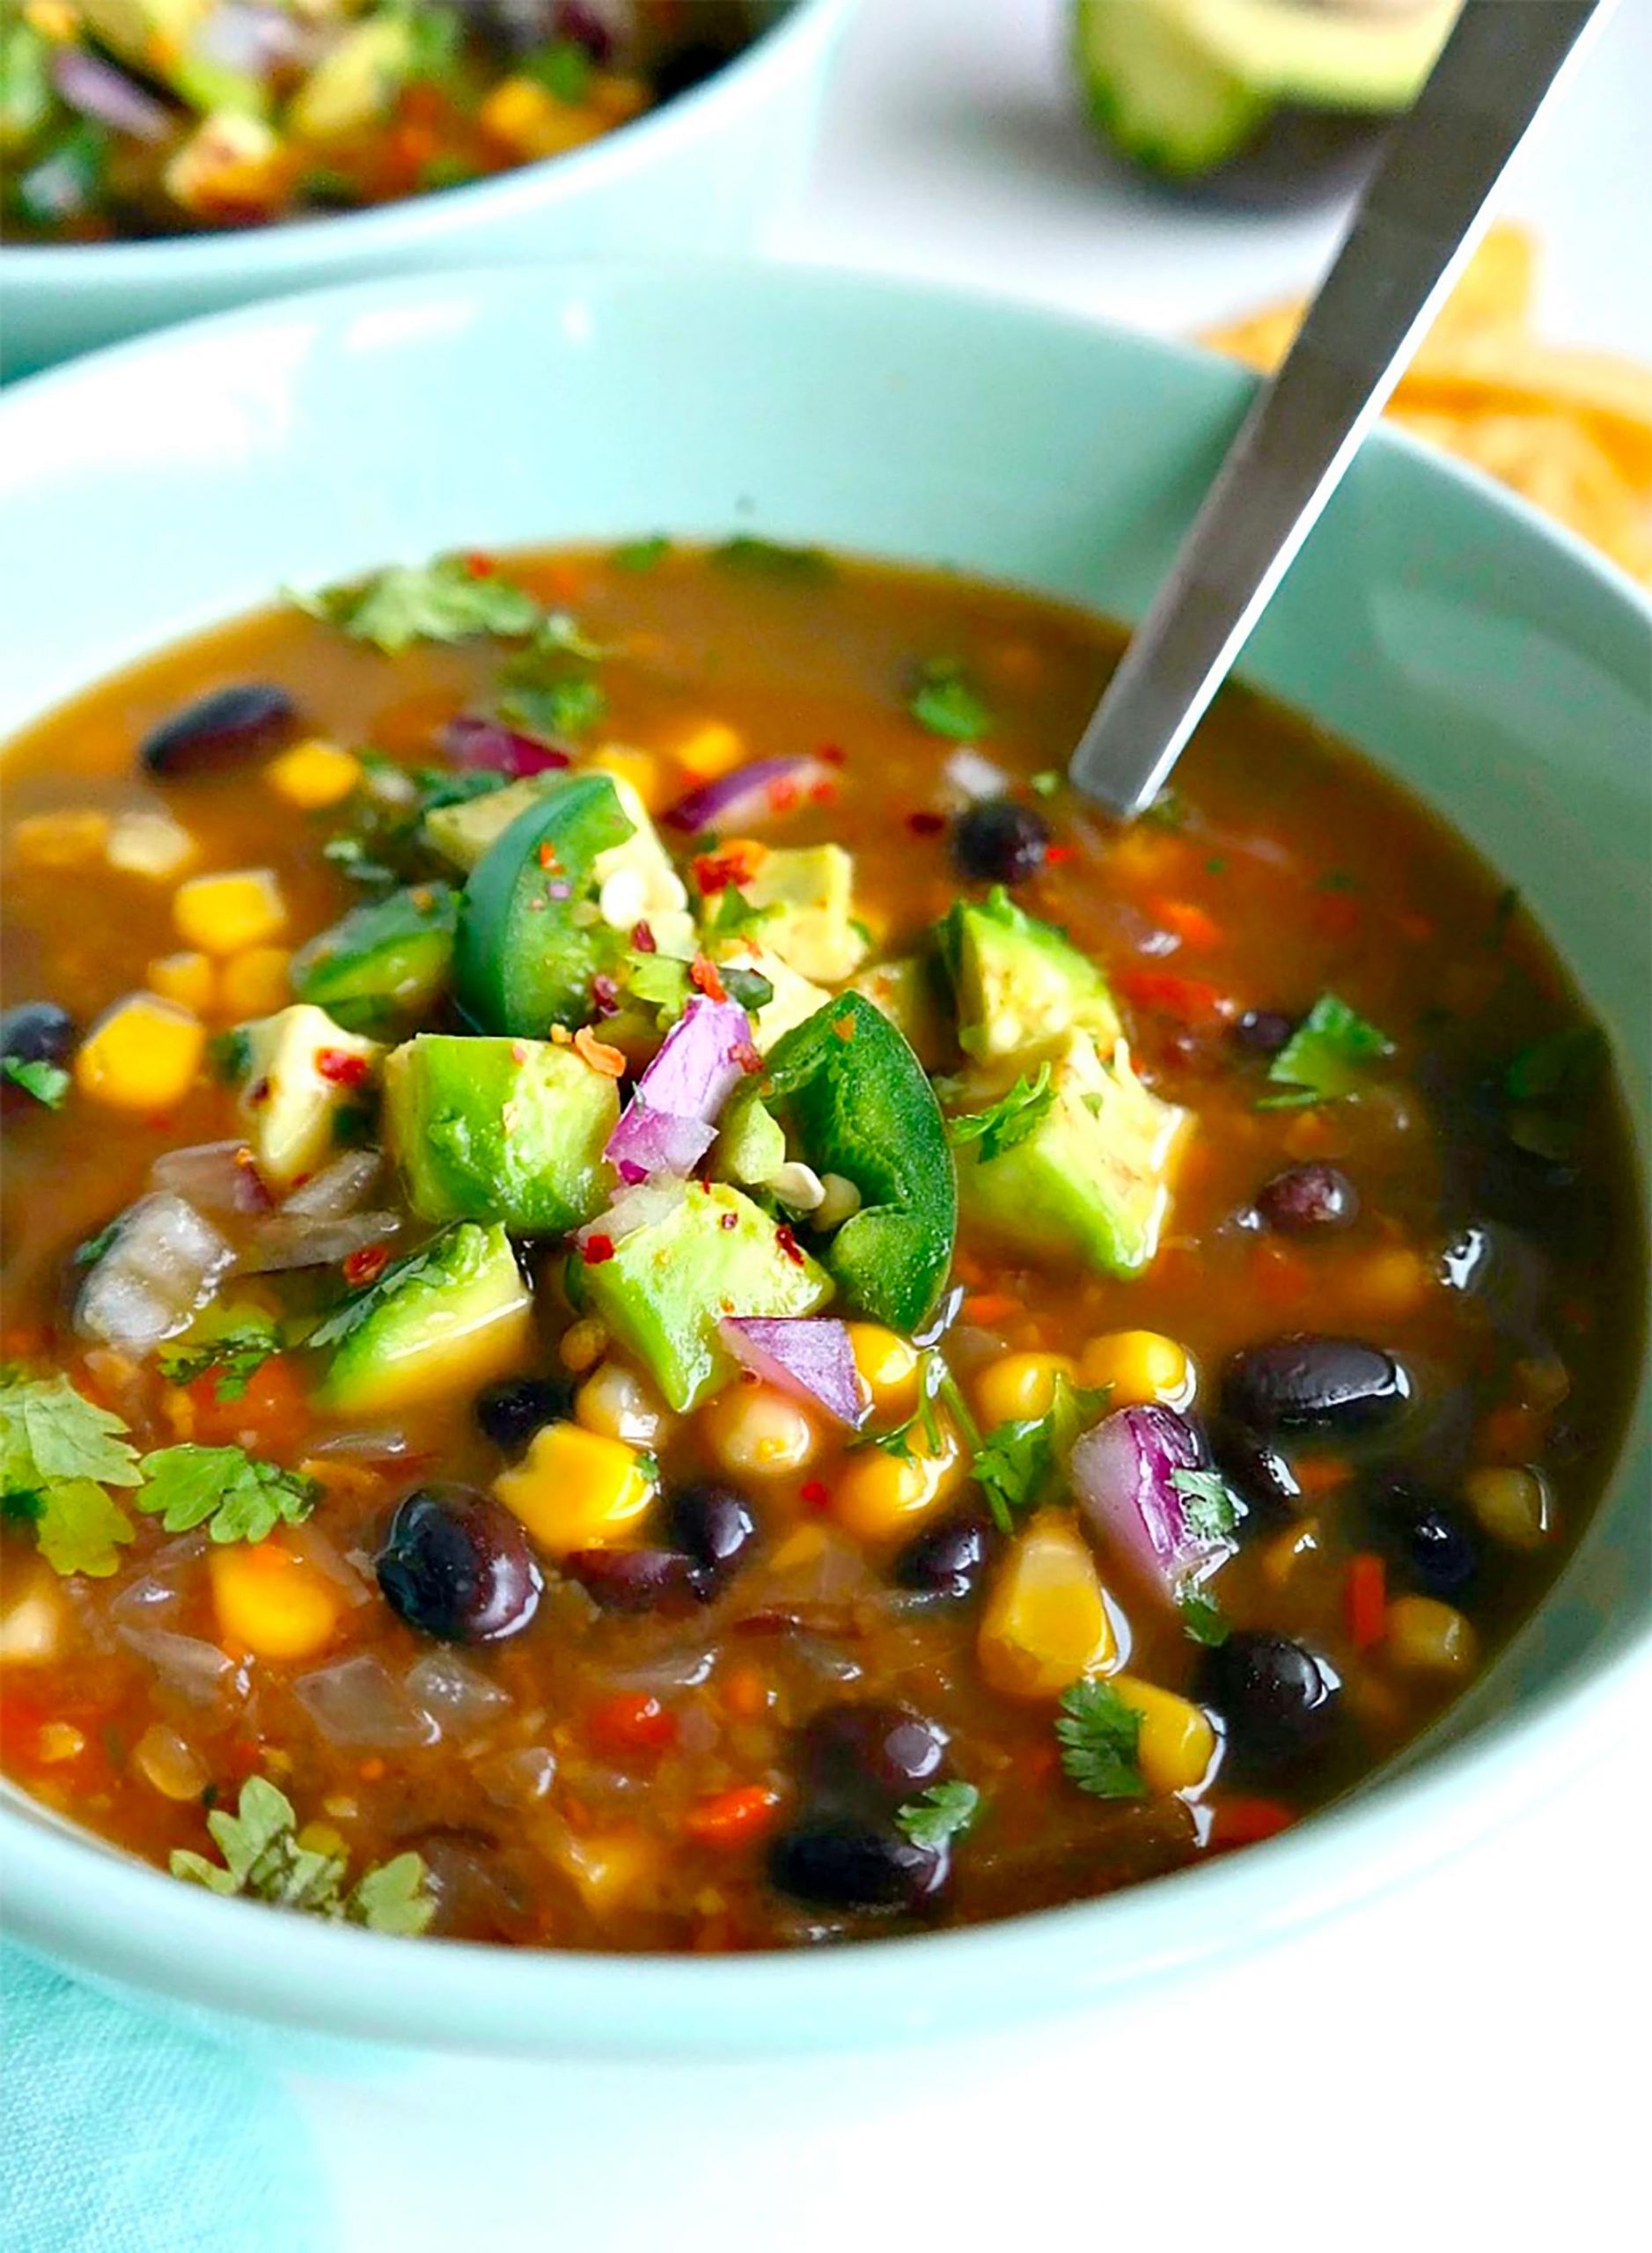 Vegan Vegetable Soup Recipes
 Healthy Vegan Winter Soup Recipes to Keep You Warm This Winter